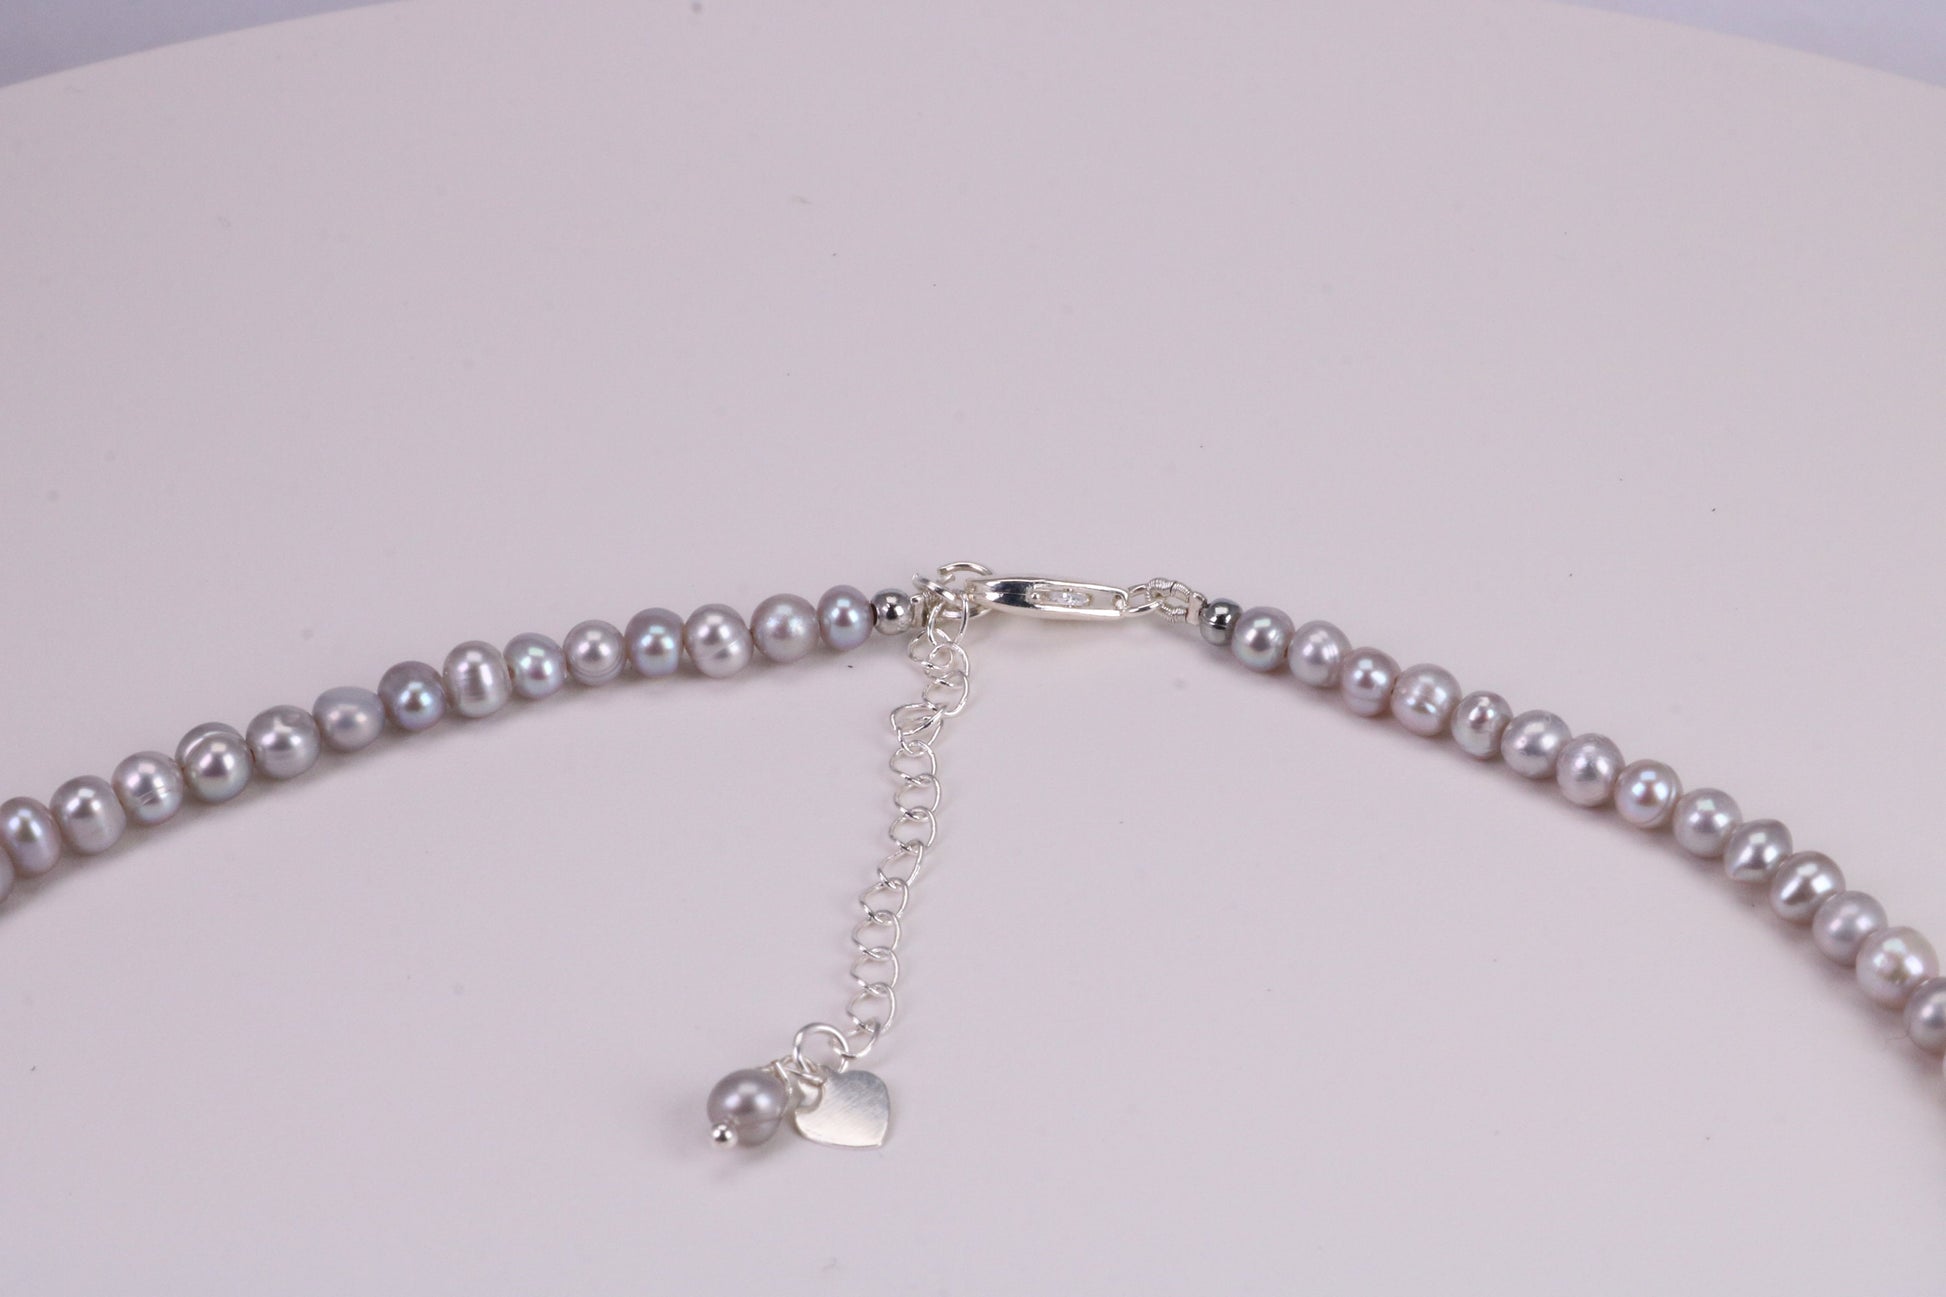 16 Inches Long Single Strand Natural 5 mm Round Grey Pearl Necklace set in Silver